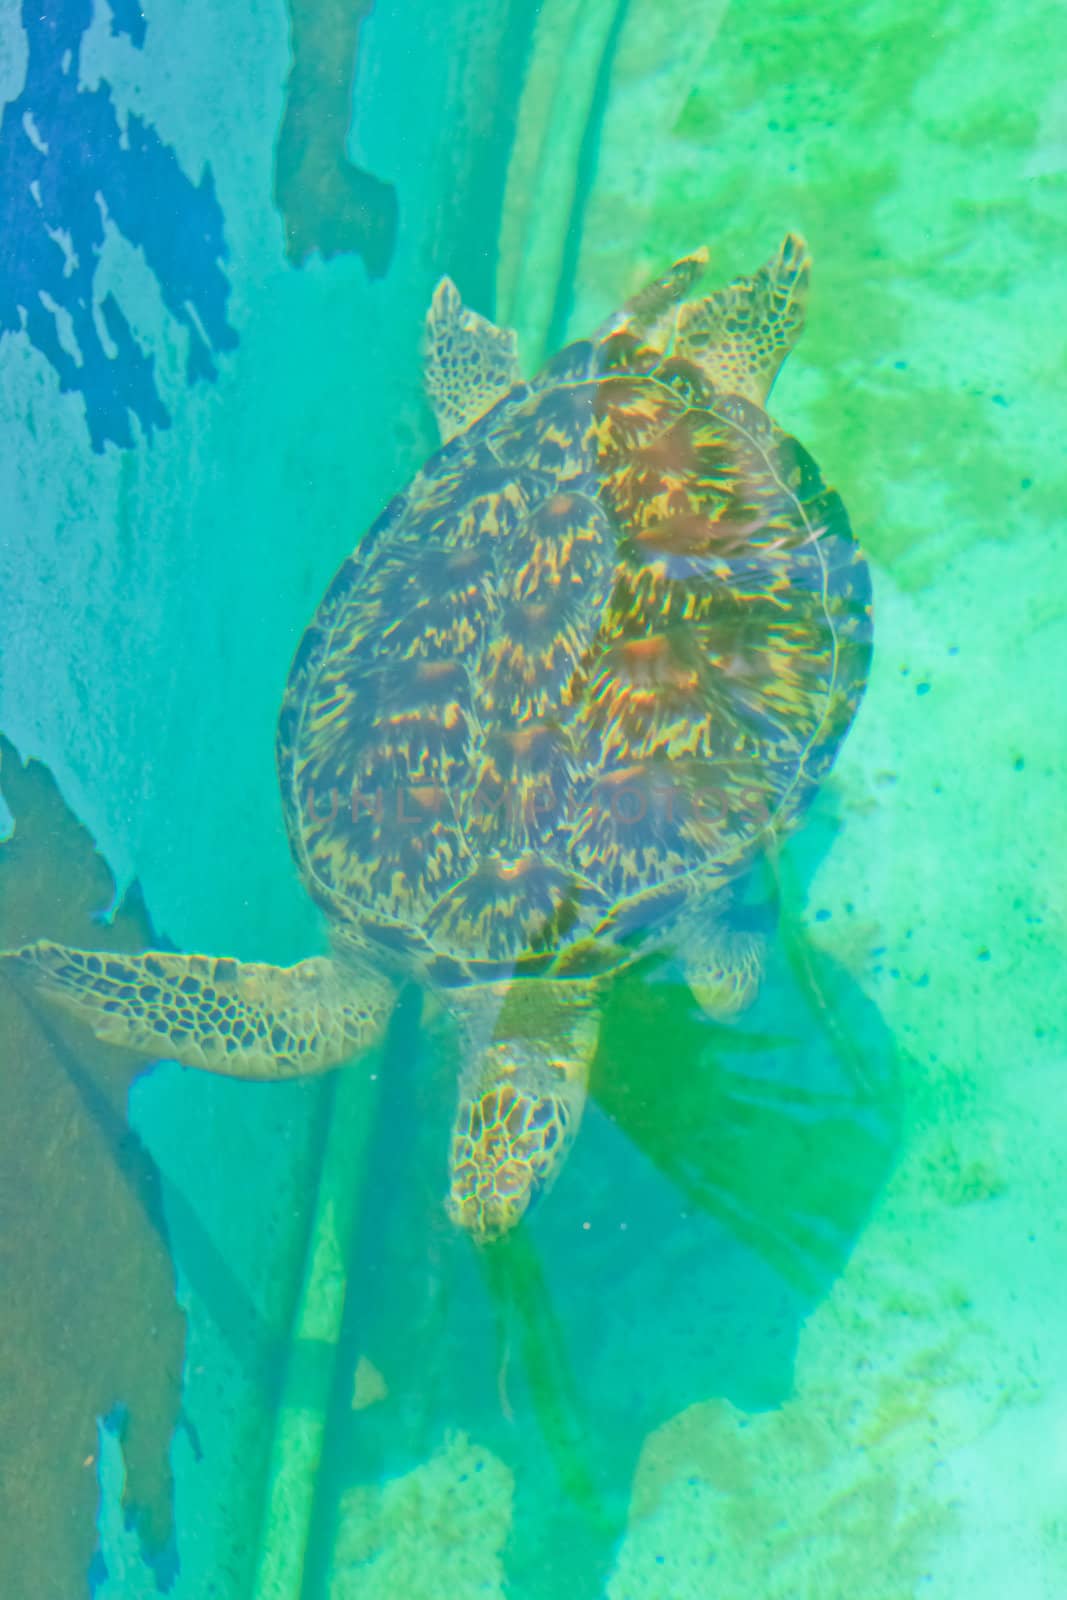  sea turtles in the aquarium of Rayong province,Thailand